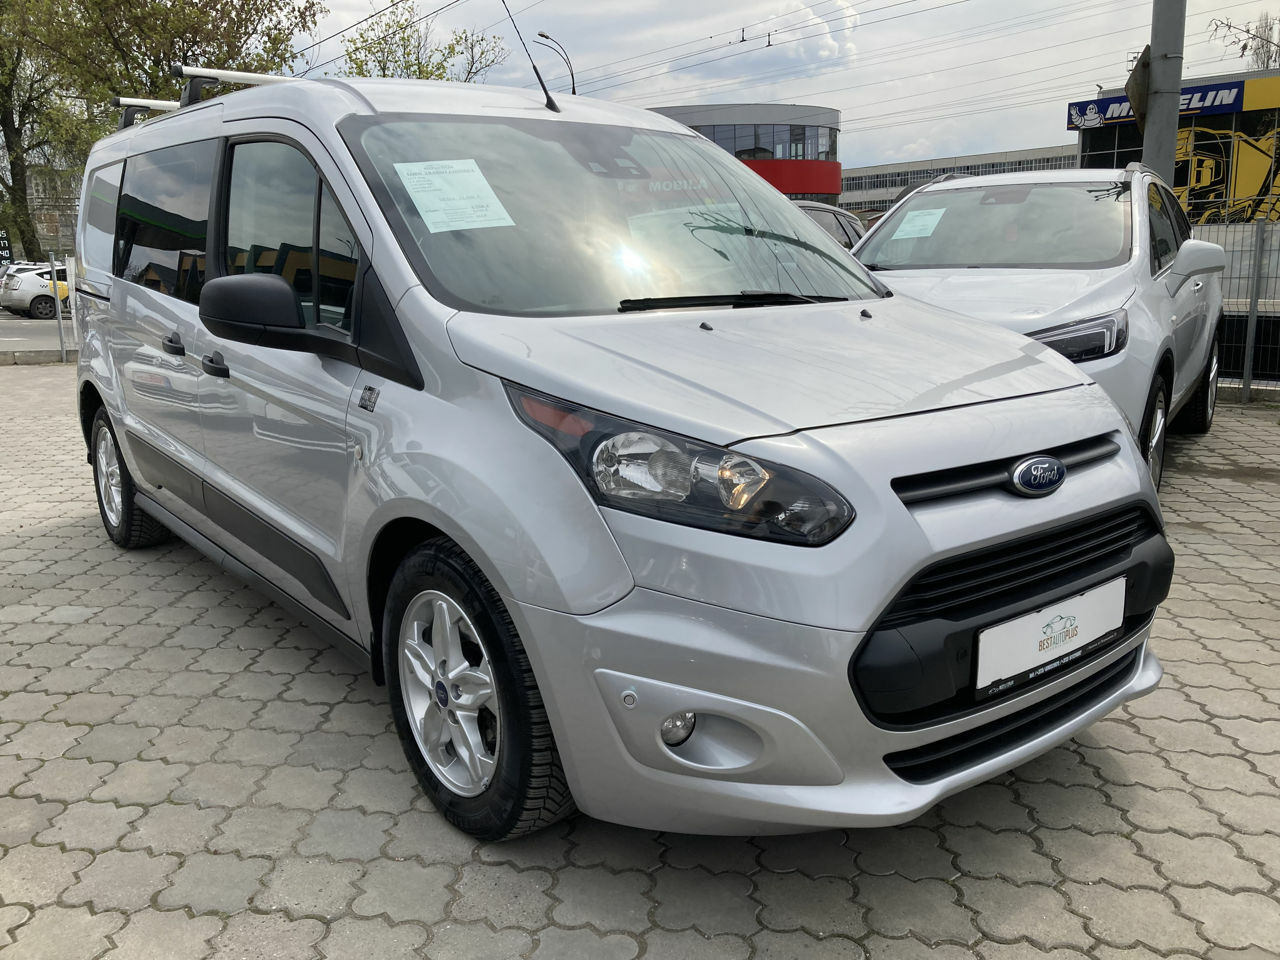 <span style="font-weight: bold;">ford transit connect</span>&nbsp;